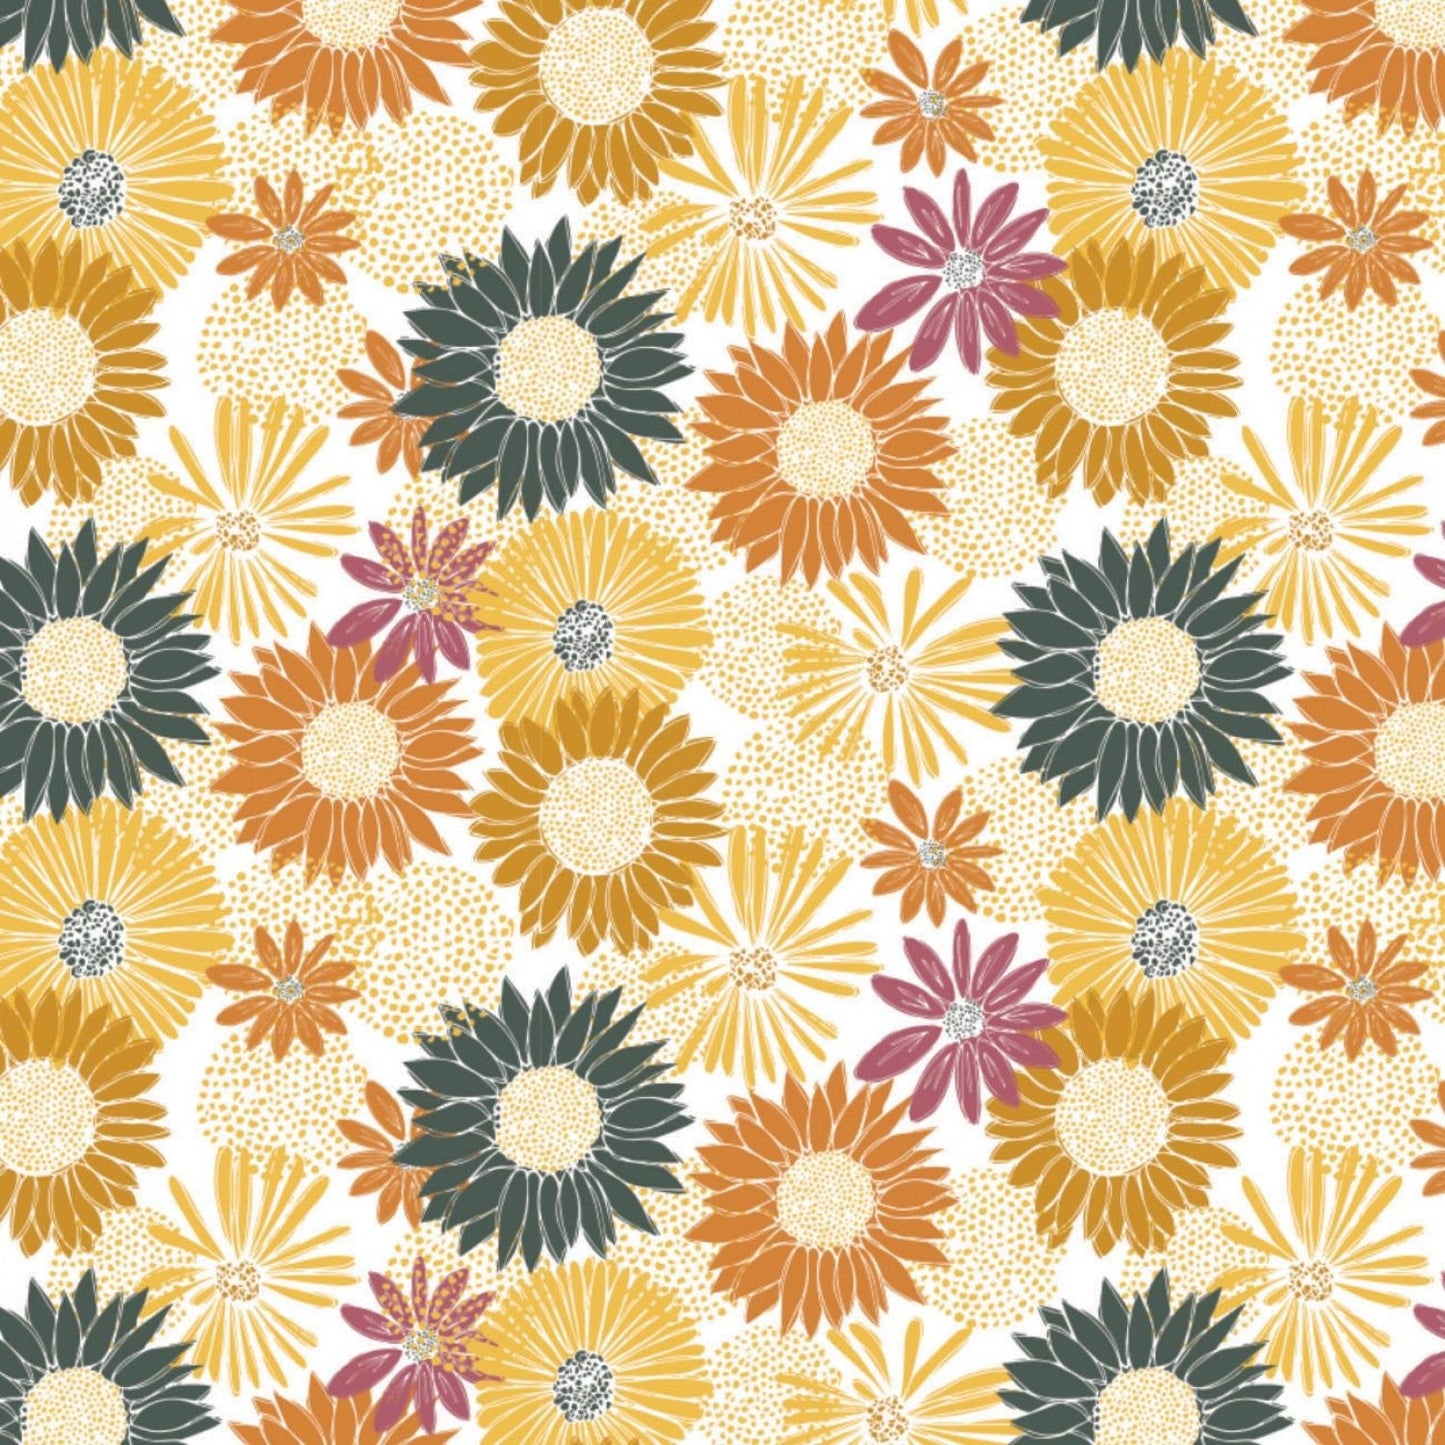 Harvest Time by Vicky Yorke Flower Cluster  30200502-1 Cotton Woven Fabric